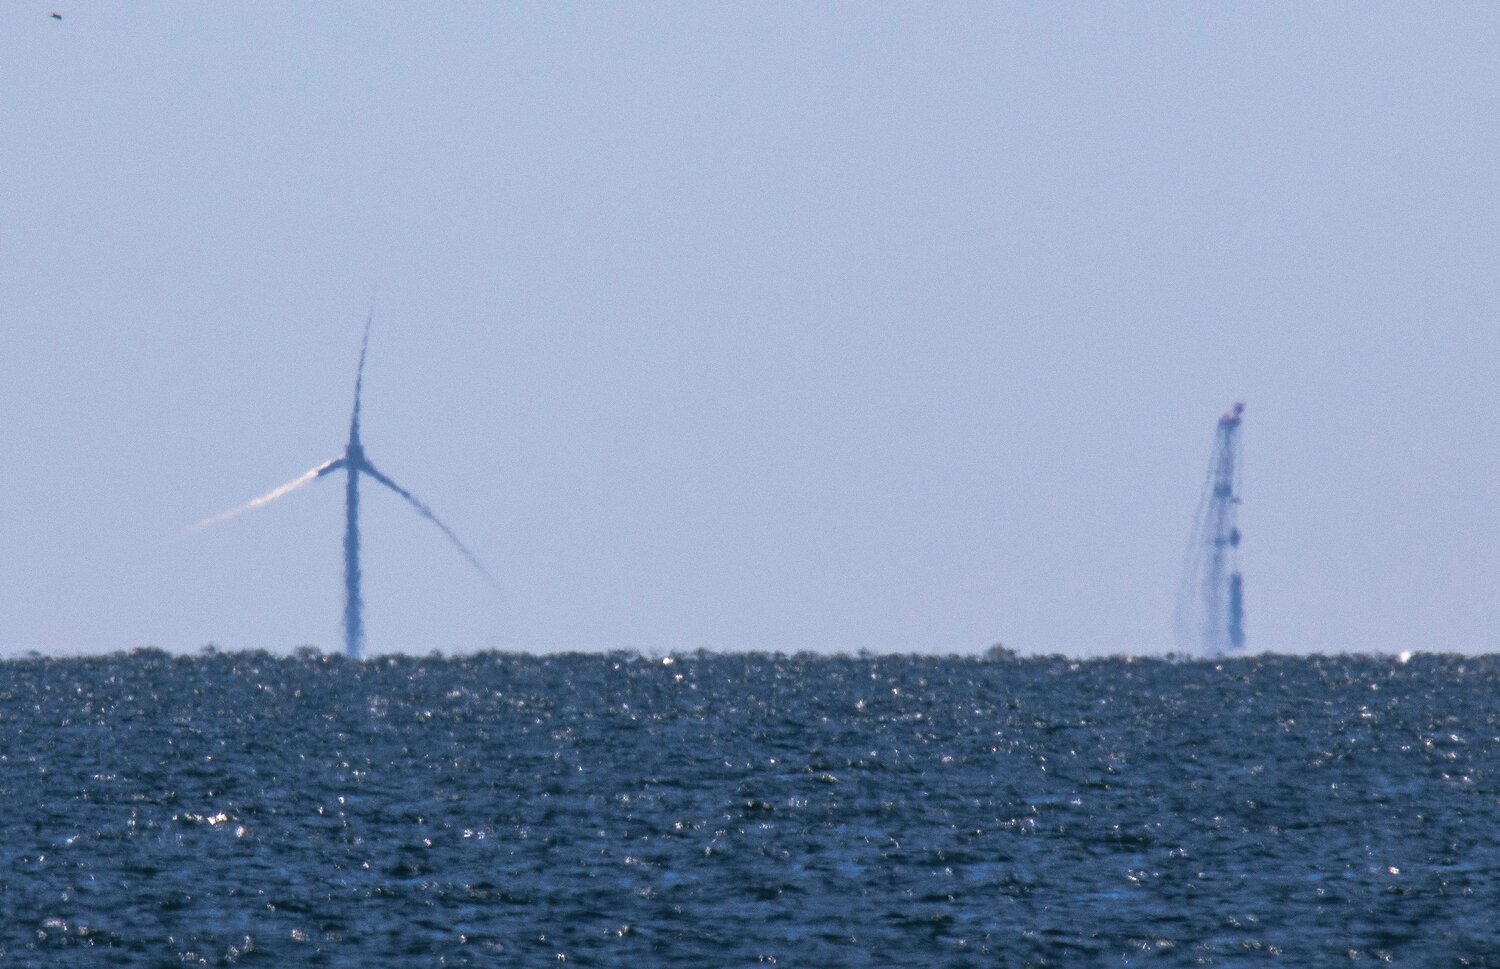 The first wind turbine installed by Vineyard Wind stands next to a construction crane. This photo was taken last week with a 600-millimeter zoom lens from the shore of Madaket Beach.